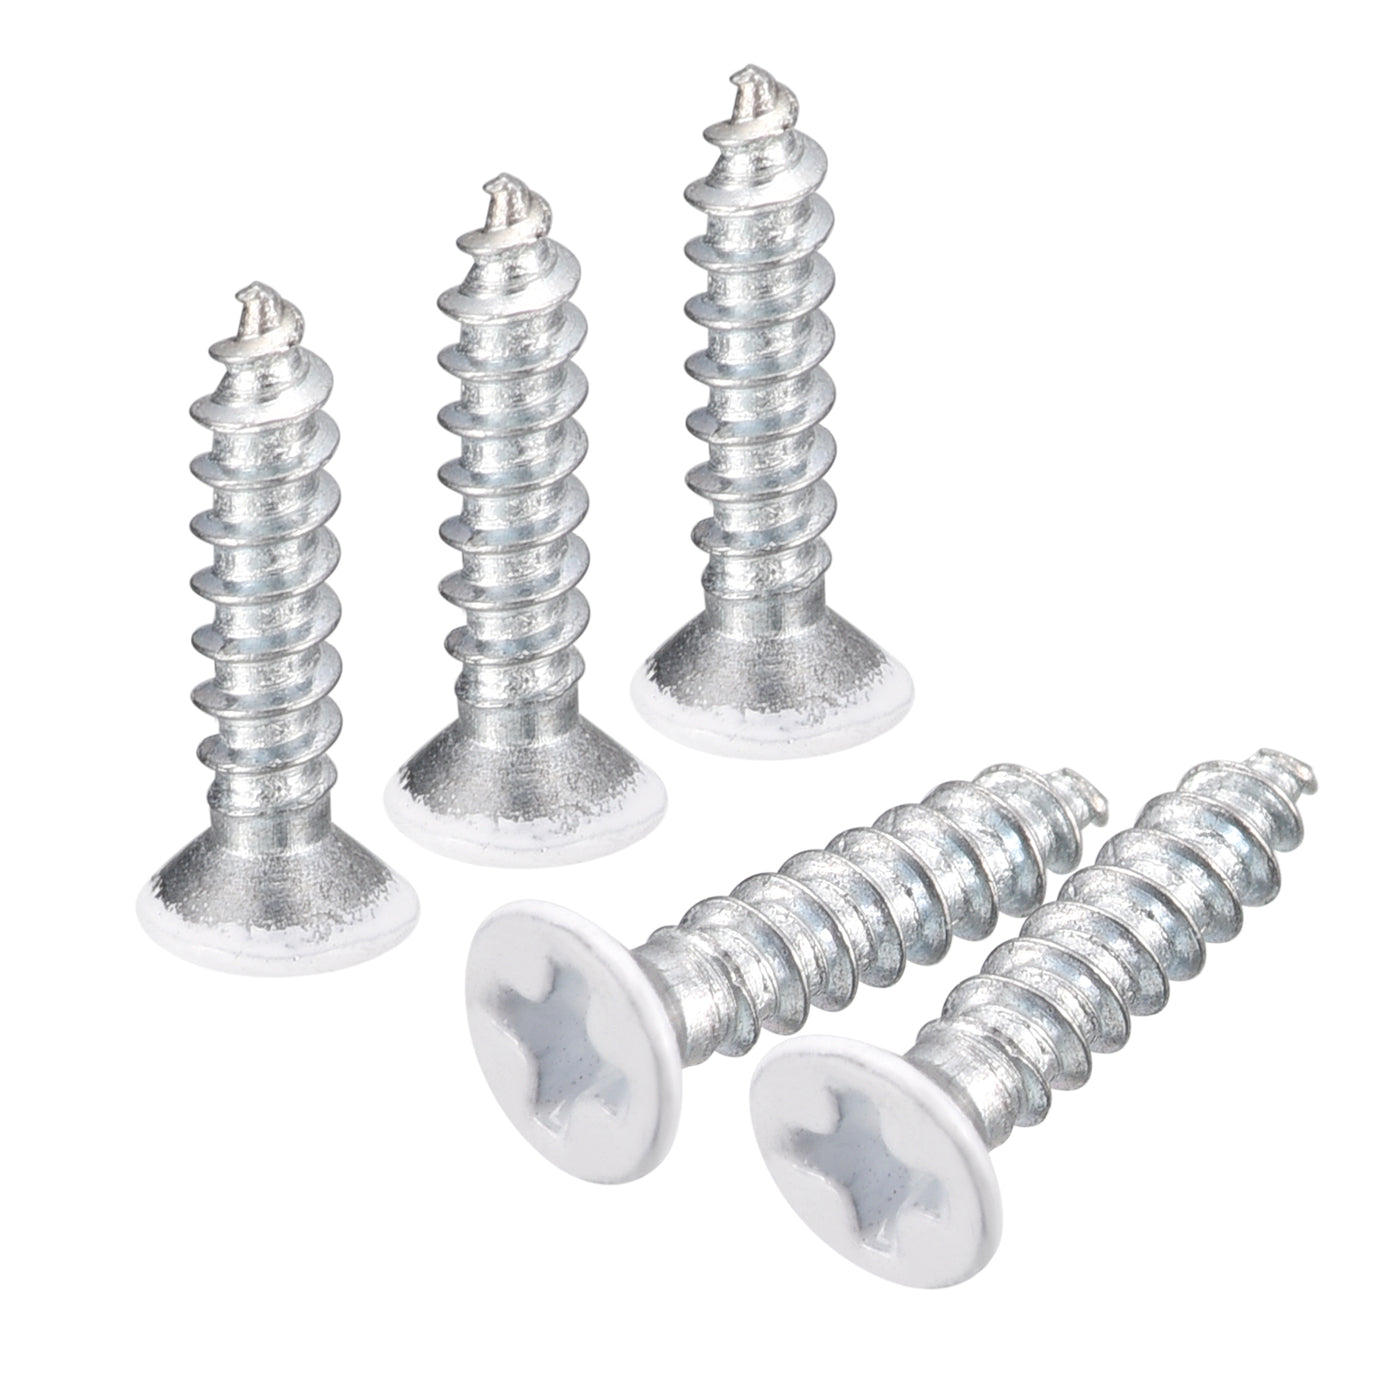 uxcell Uxcell ST3x15mm White Self Tapping Screws, 50pcs Flat Head Phillips Wood Screws